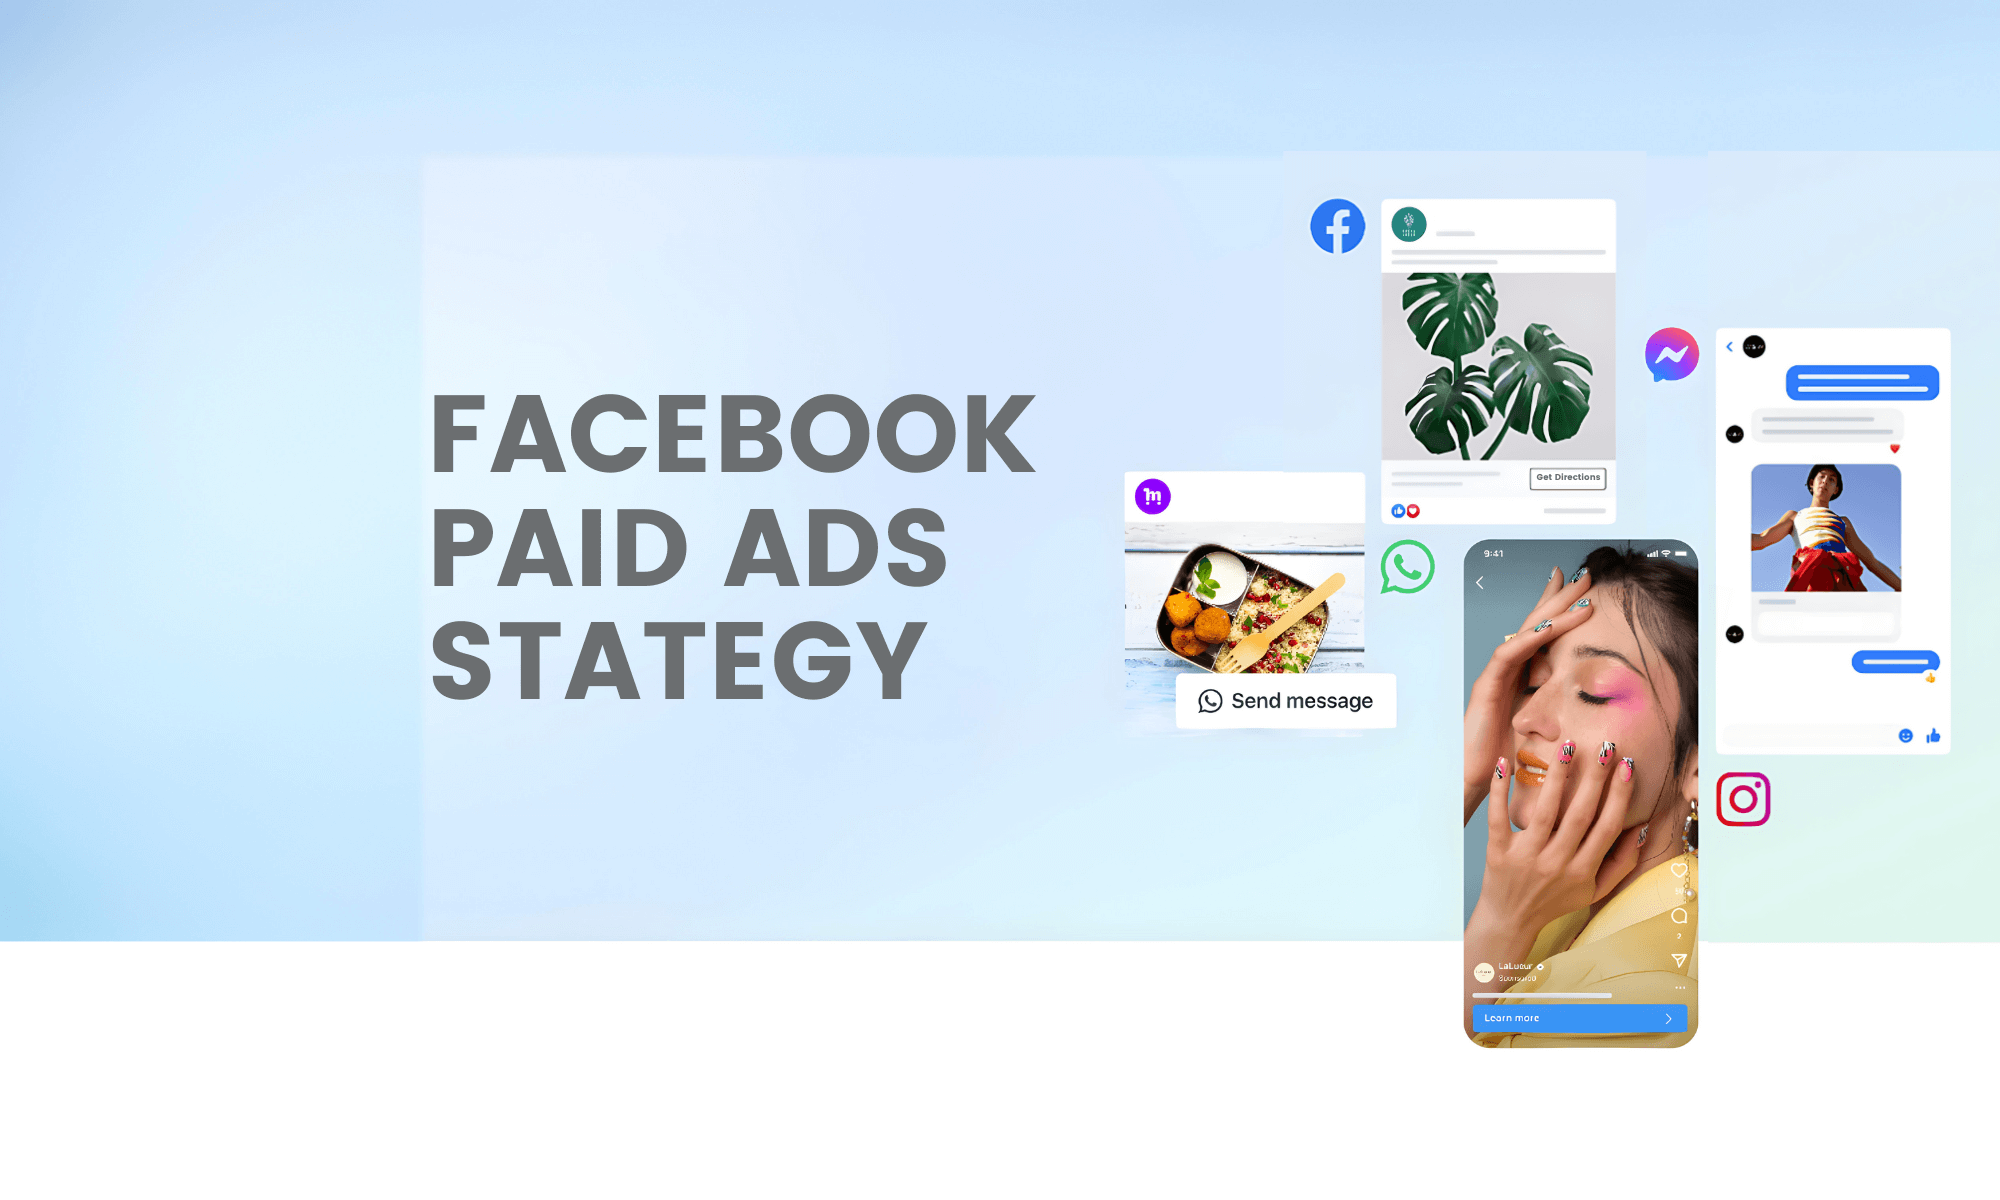 Facebook Paid Ads Strategy - Maximize your marketing returns with professional ads management